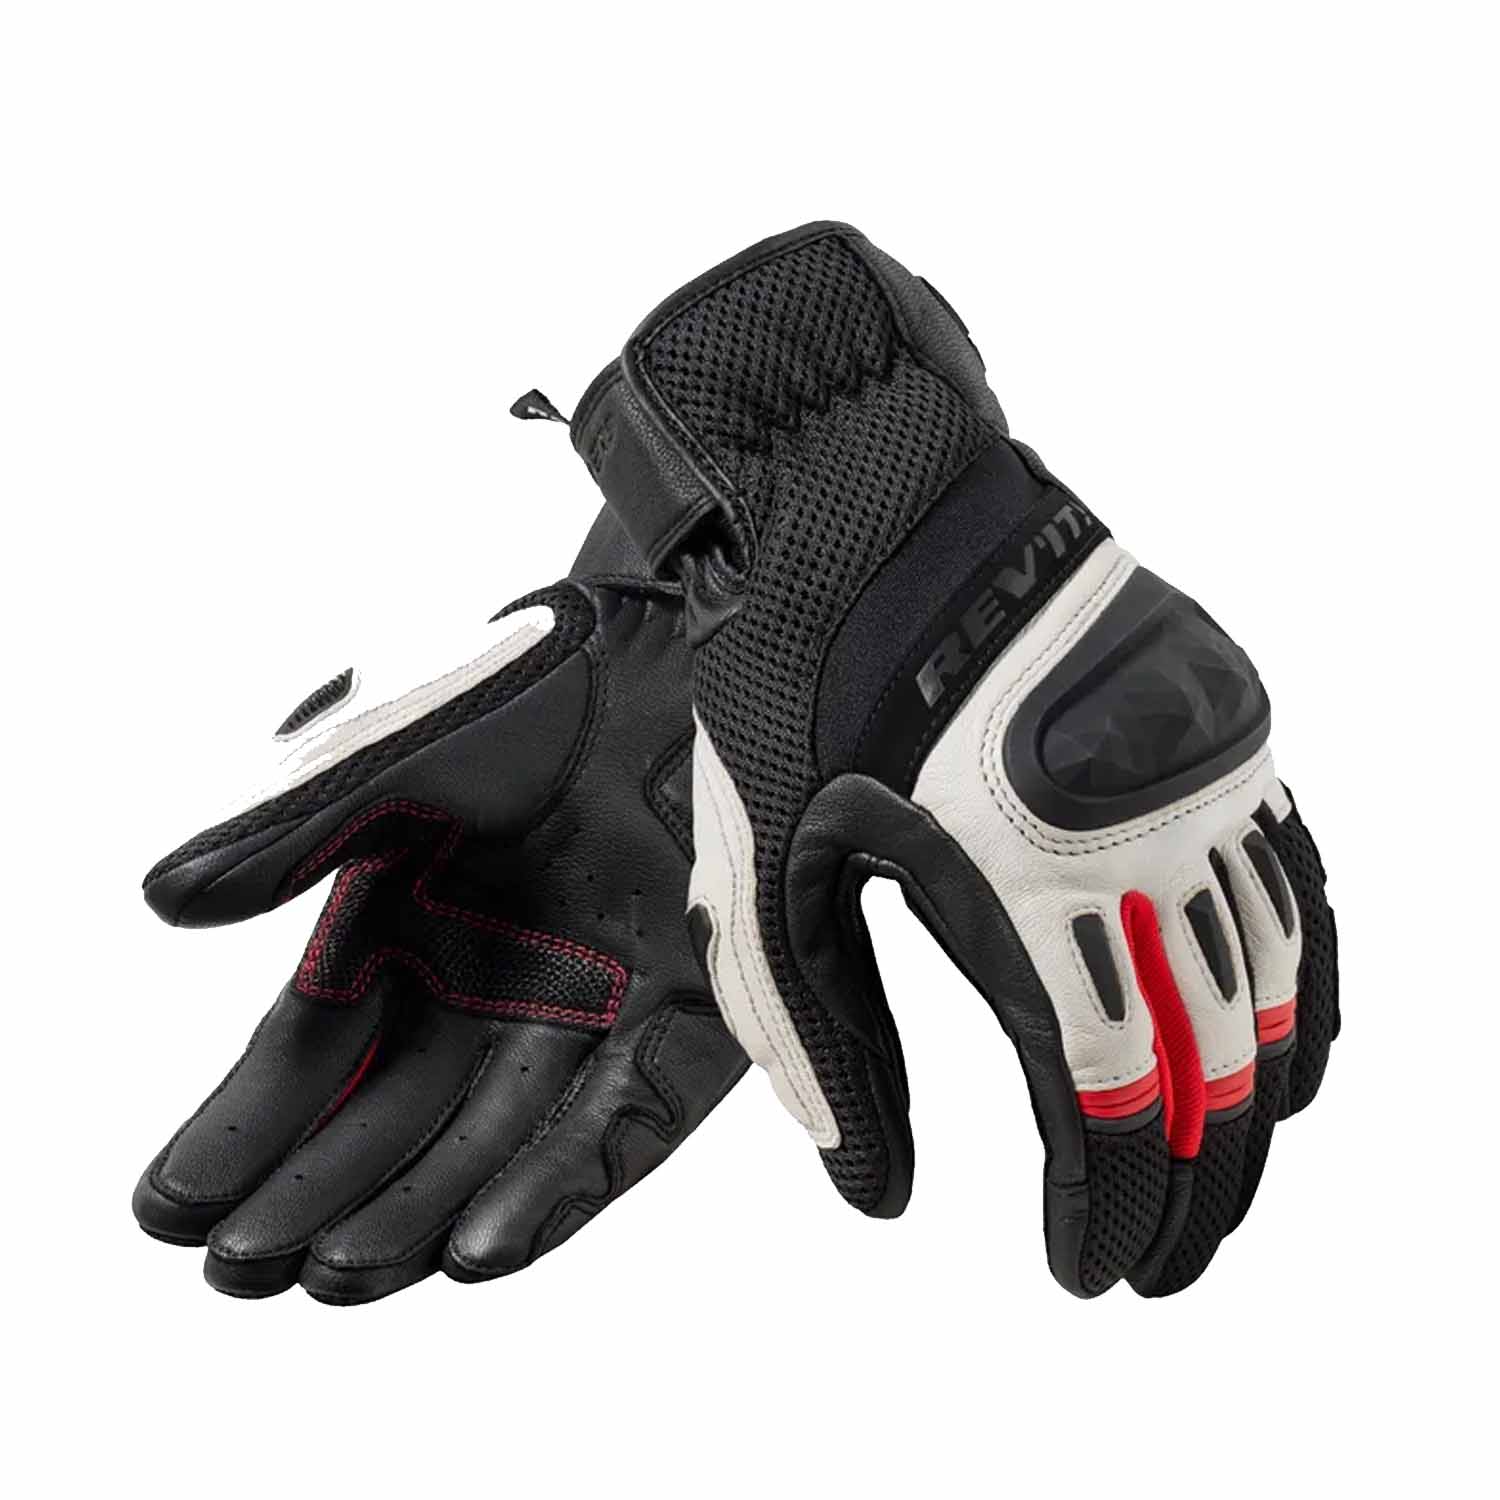 Image of REV'IT! Dirt 4 Gloves Black Red Size 3XL ID 8700001383509